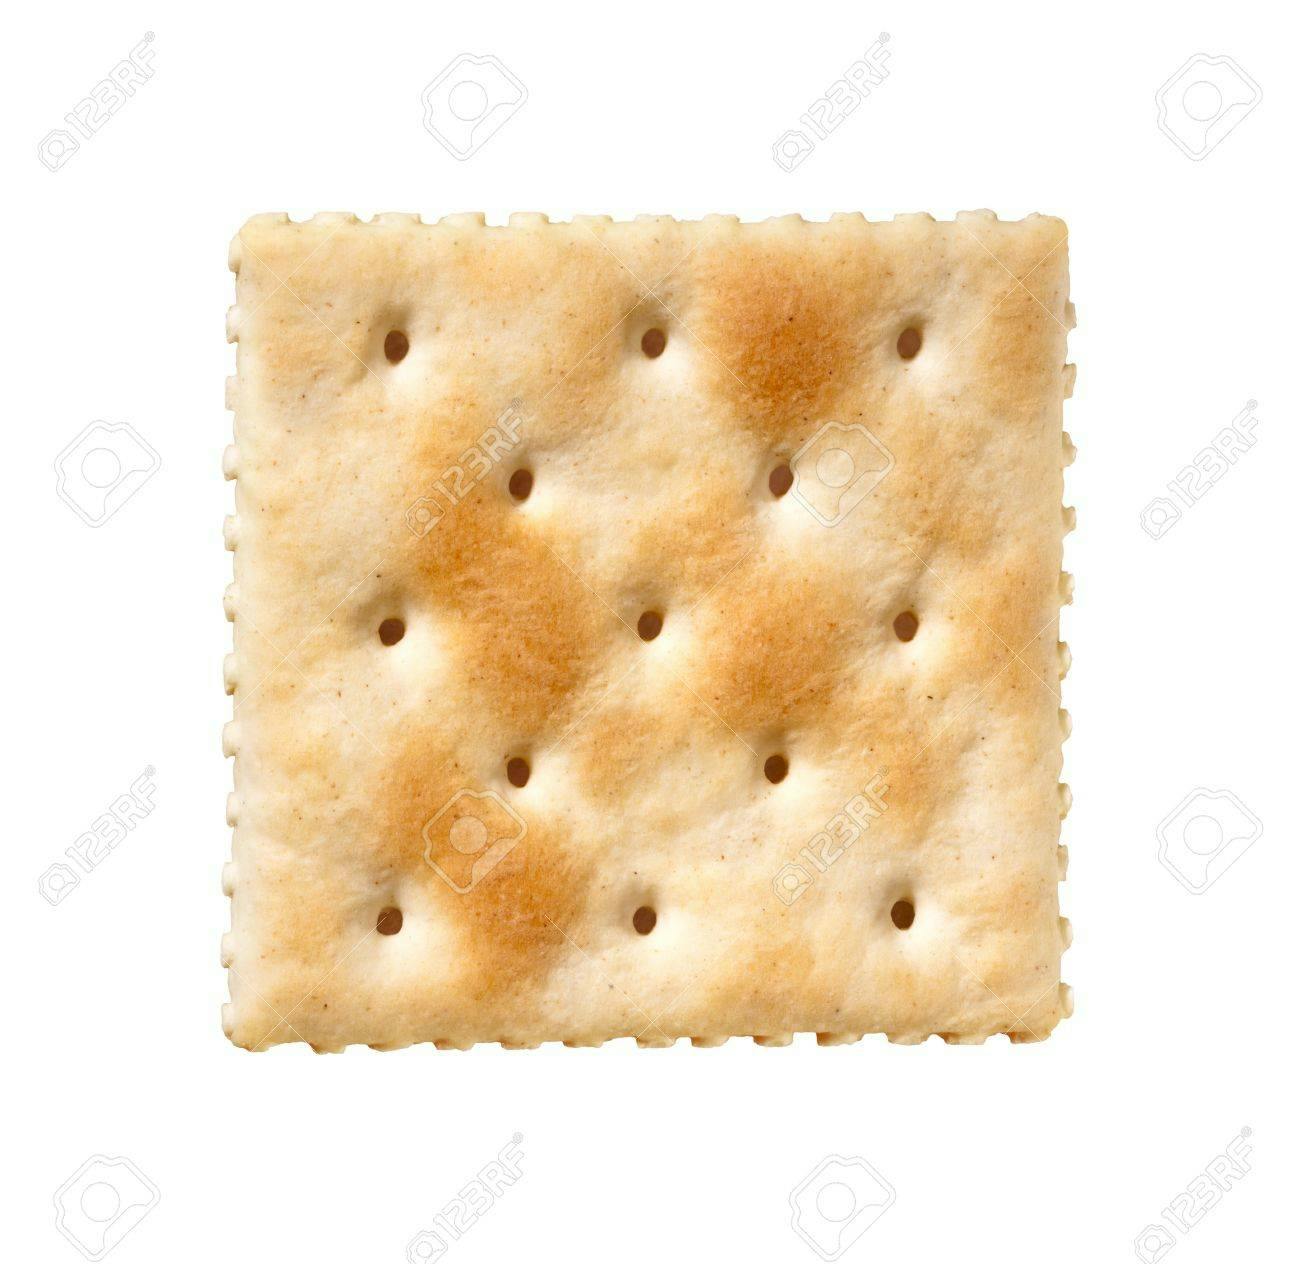 saltine crackers, for serving